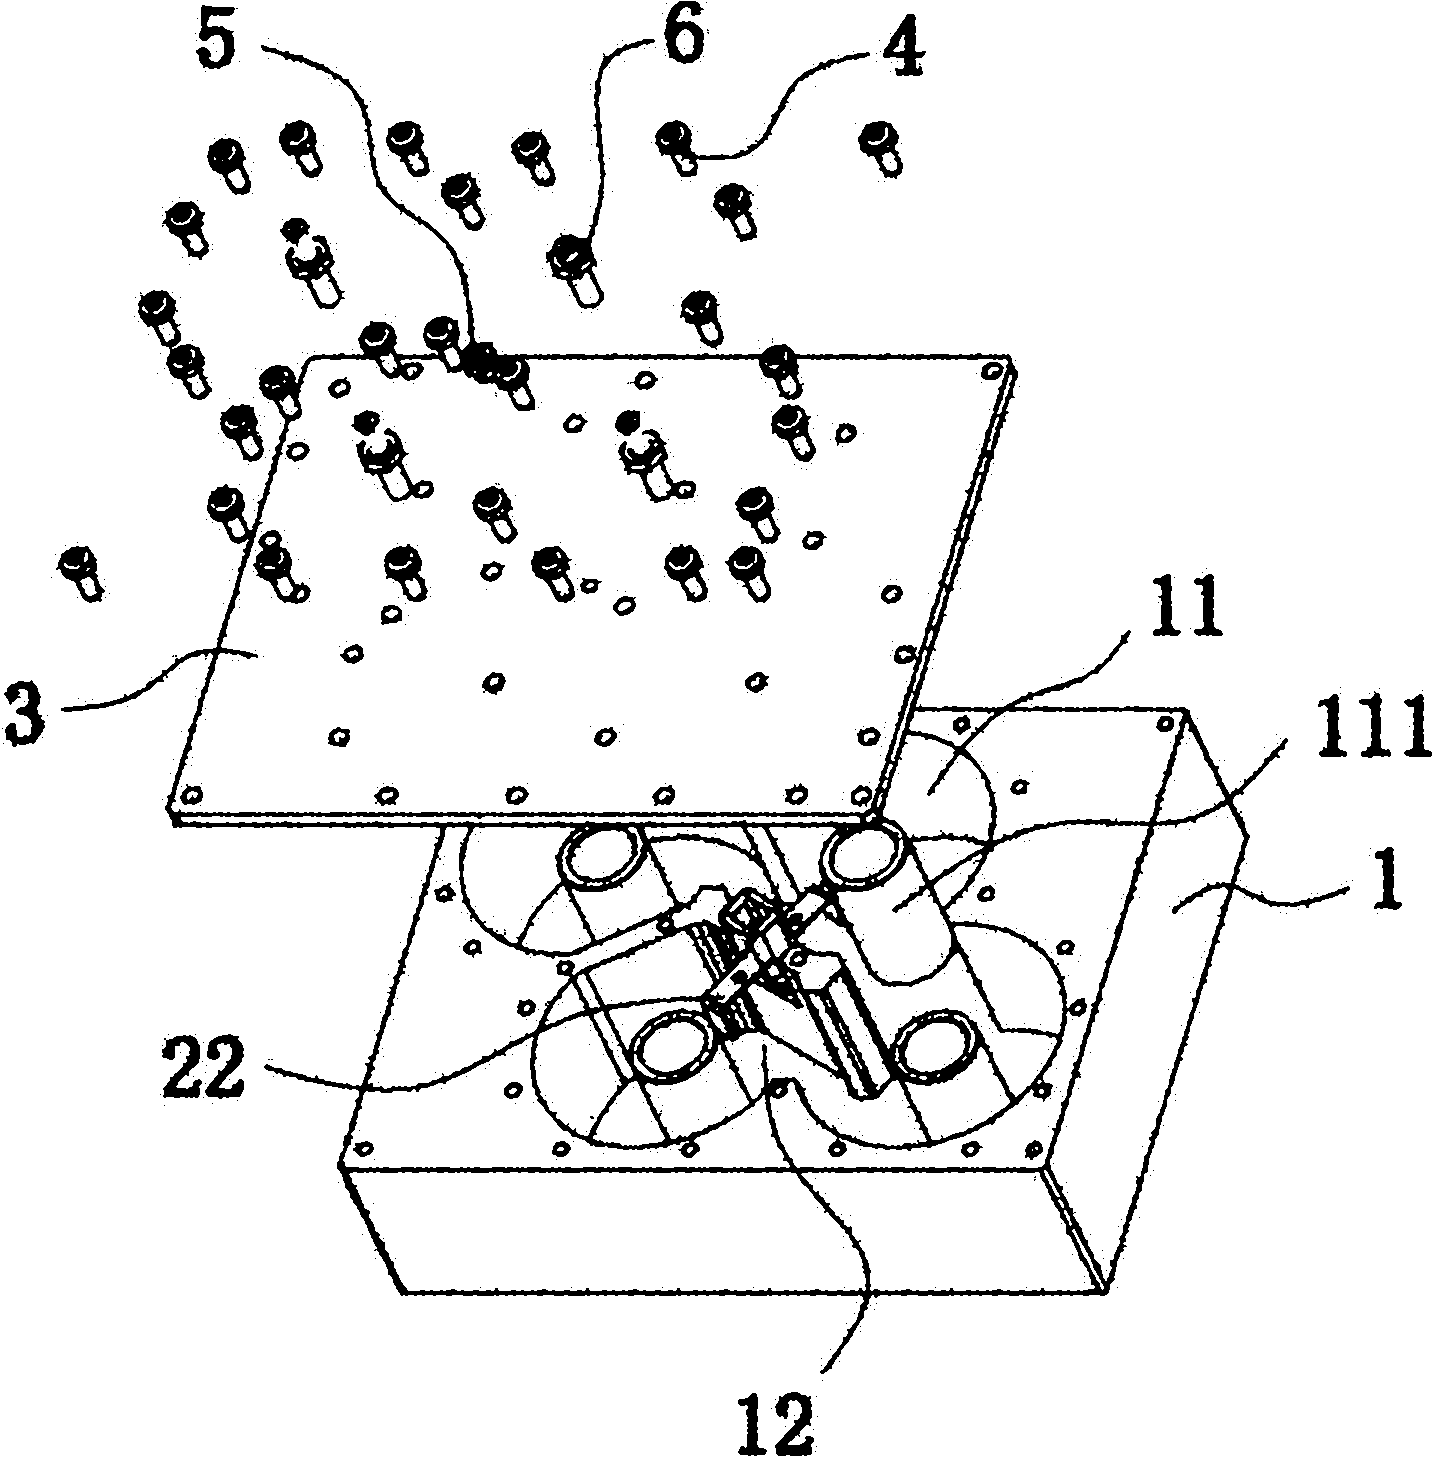 Filter coupling structure with adjustable capacity